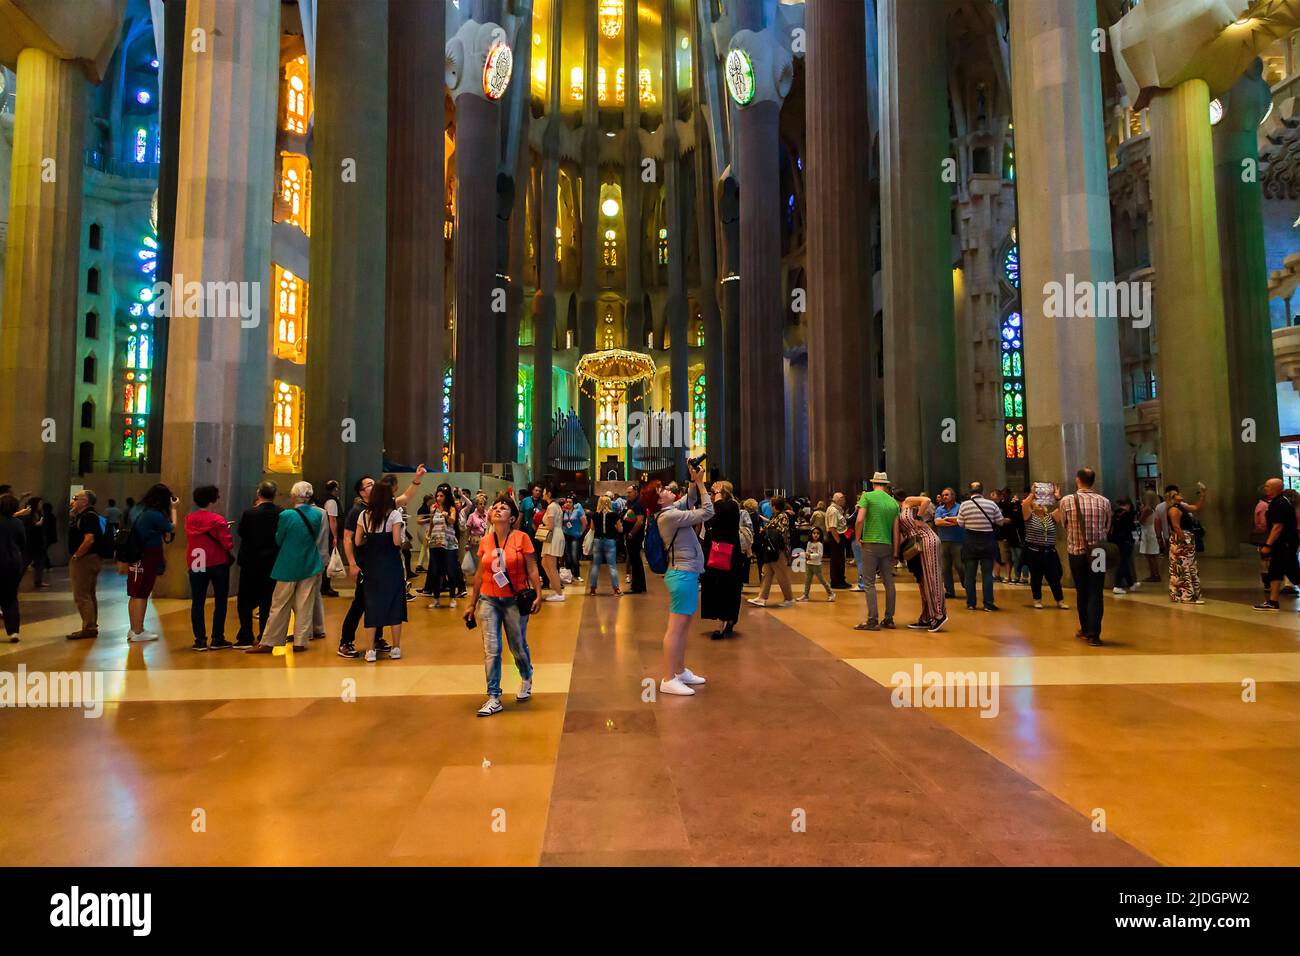 BARCELONA, SPAIN - MAY 16, 2017: Tourists are visiting the interior of the Sagrada Familia. Stock Photo